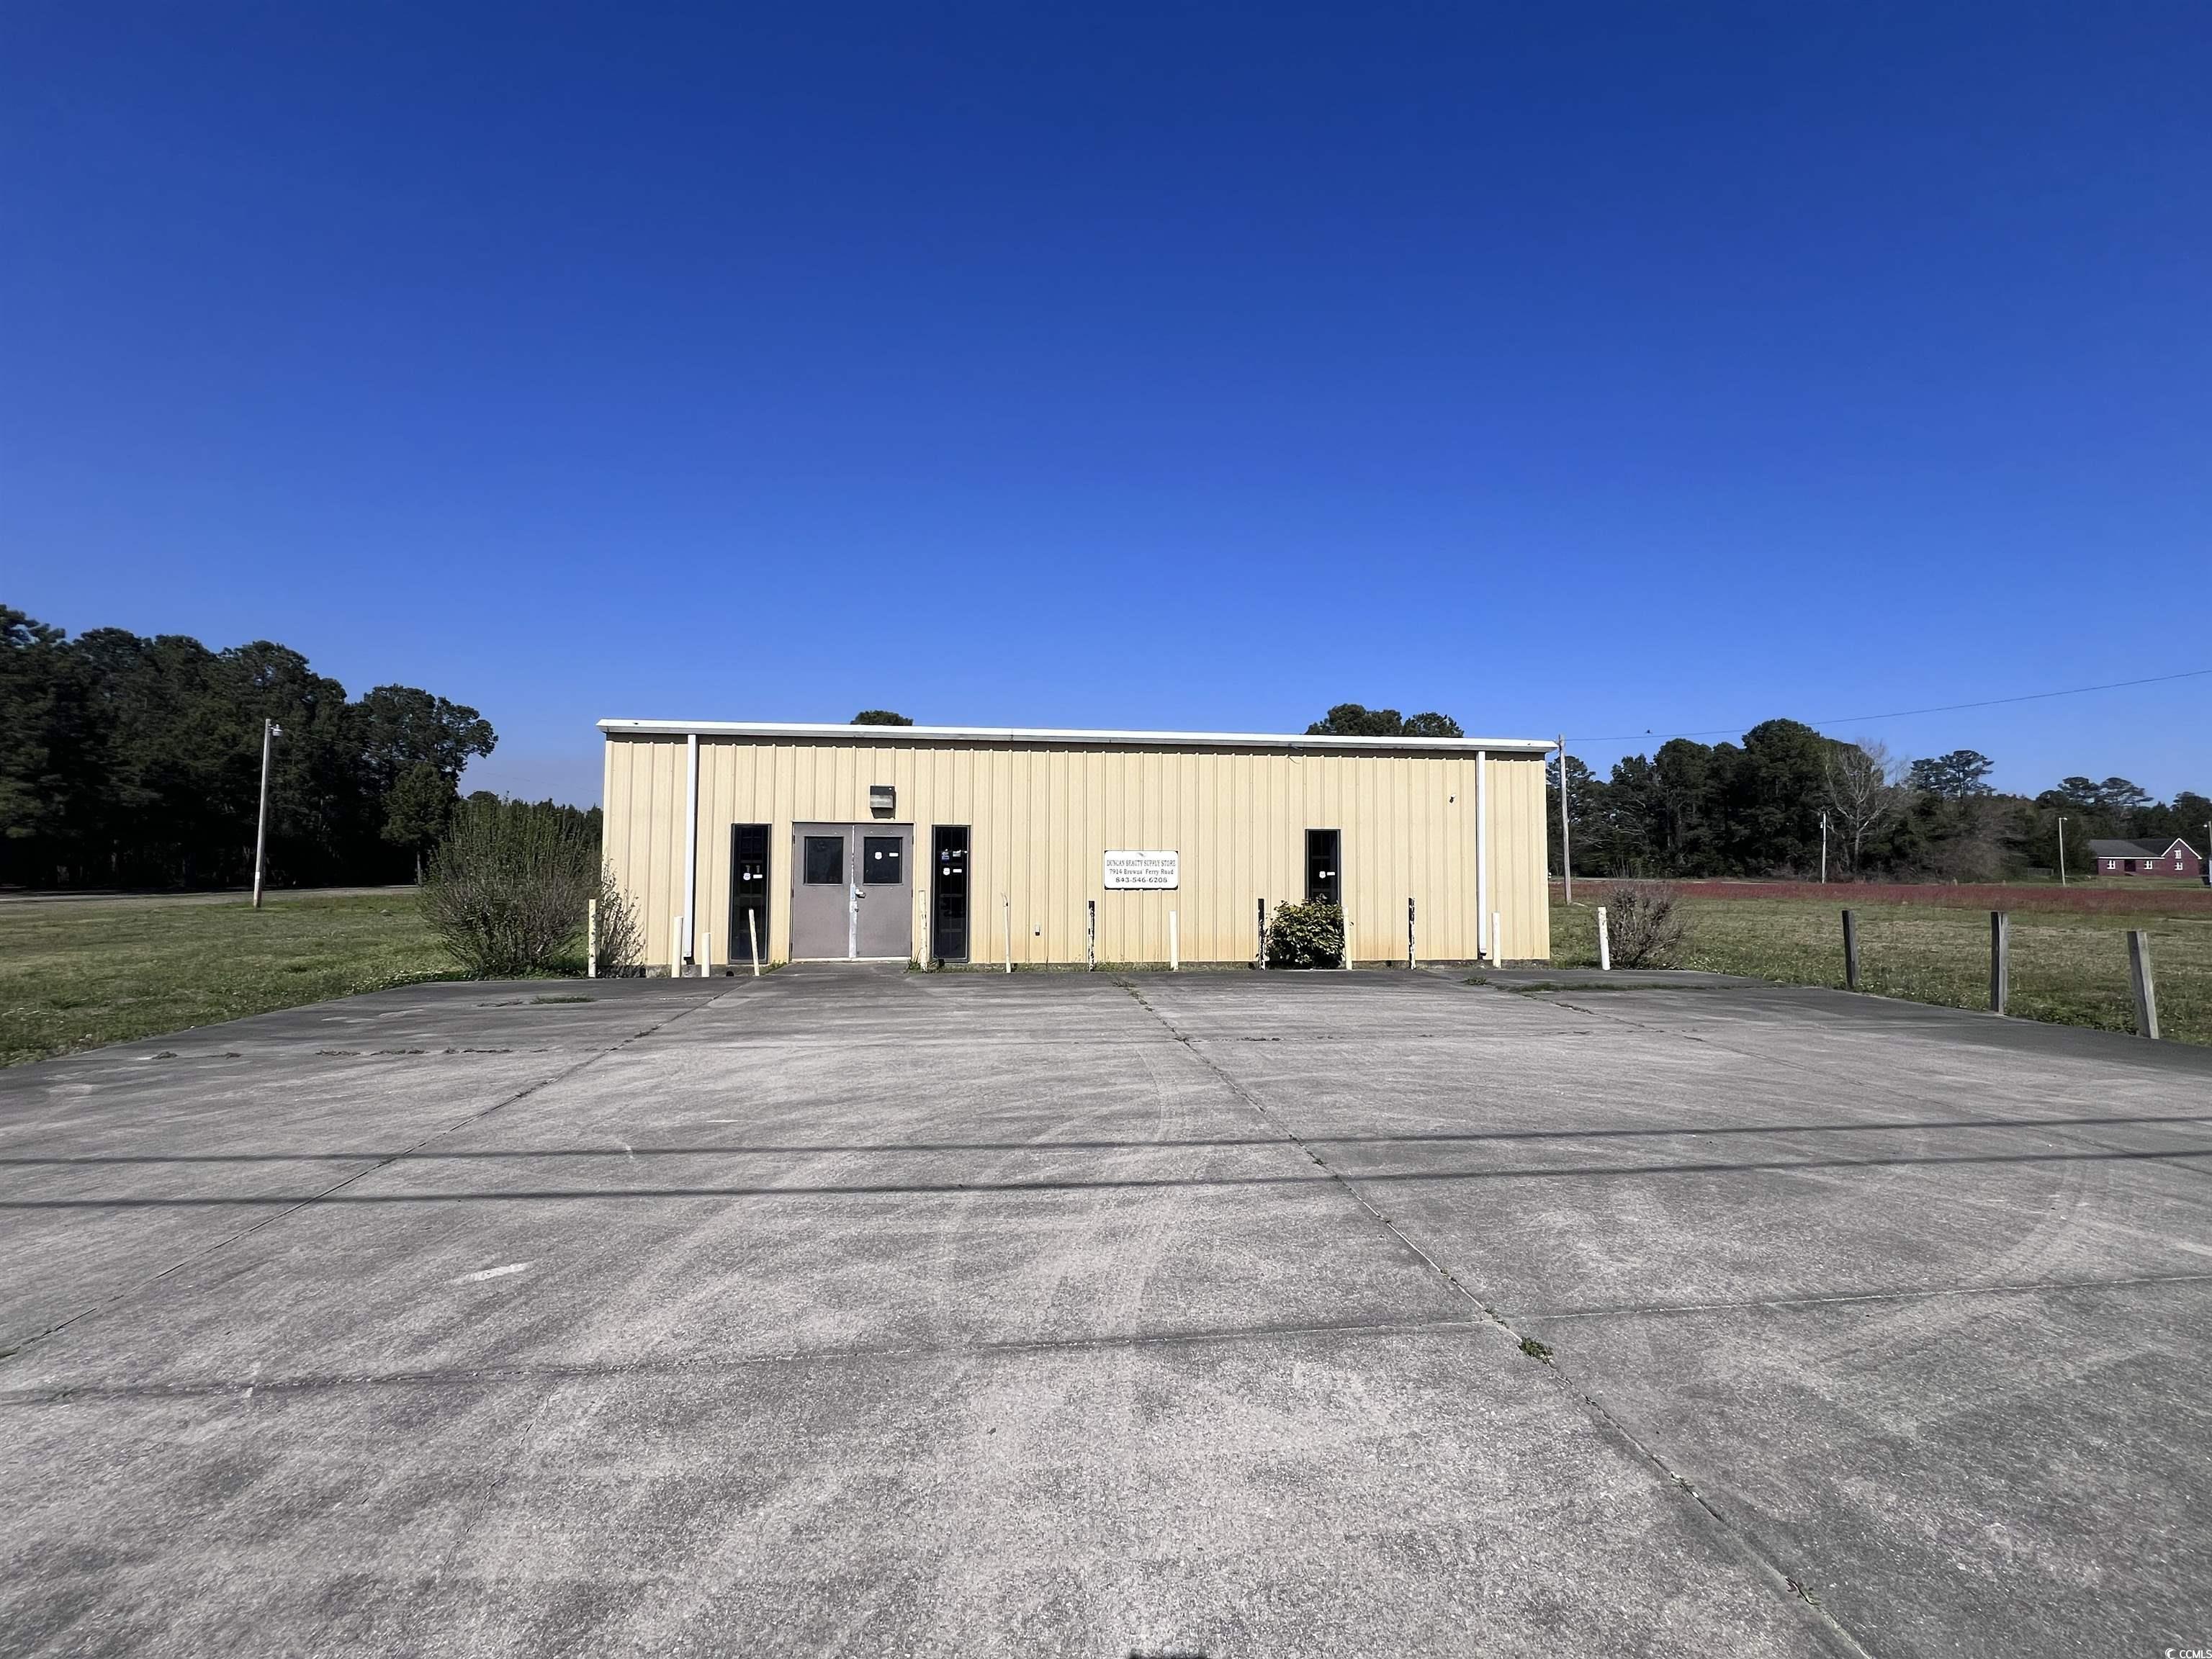 almost 3 acres commercial on hwy  51 in browns ferry with 2500 square foot metal building. this offering has 445 feet frontage. building is finished inside with hvac, drop ceiling and bath.